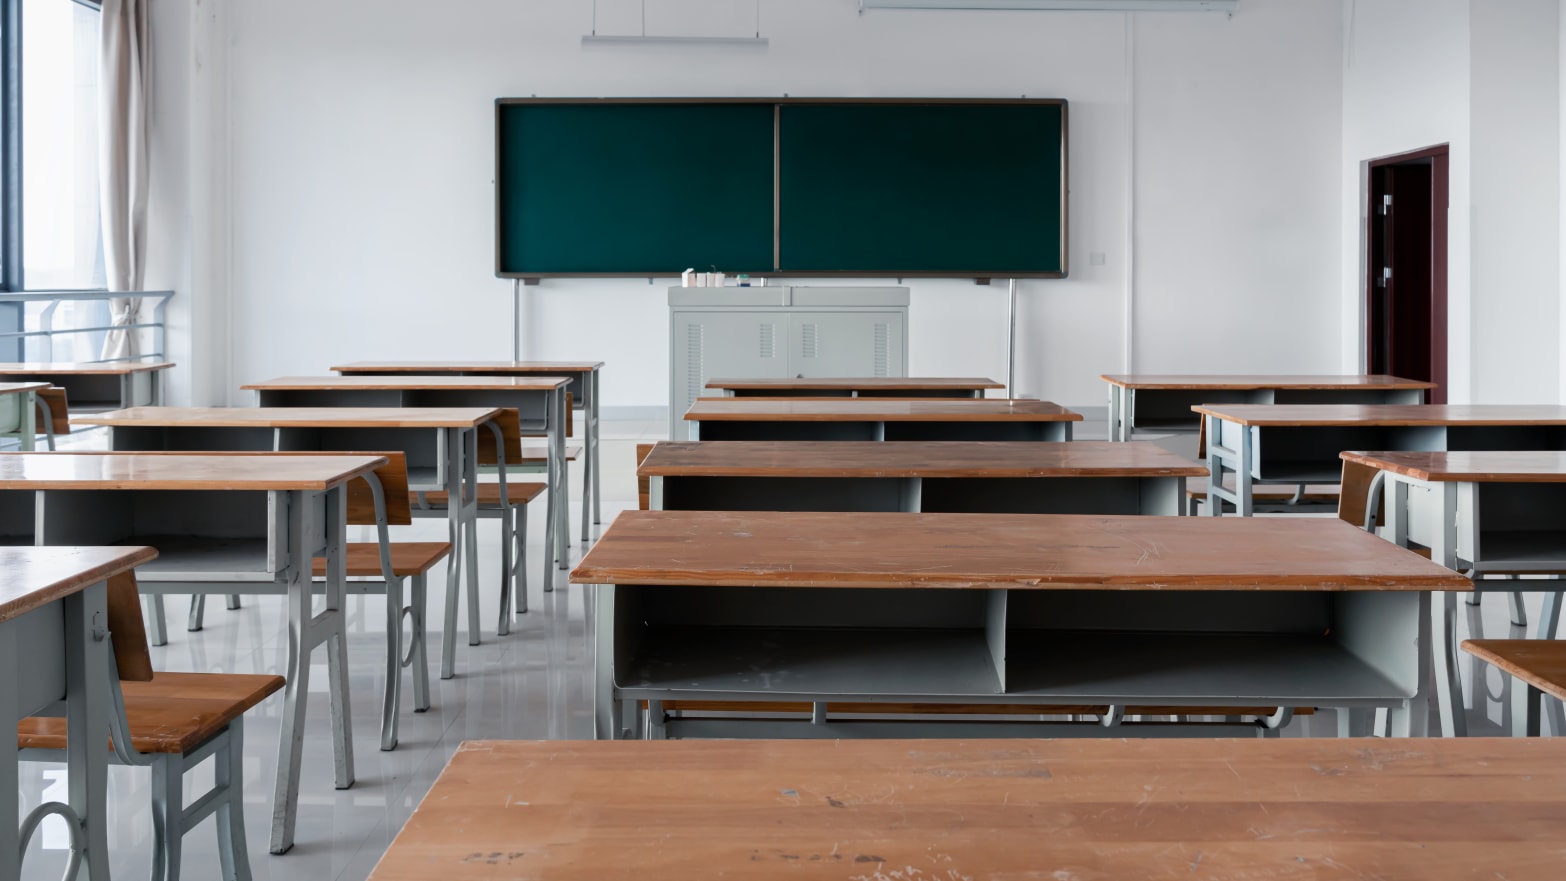 Classrooms with desks, chairs, podiums and blackboards.